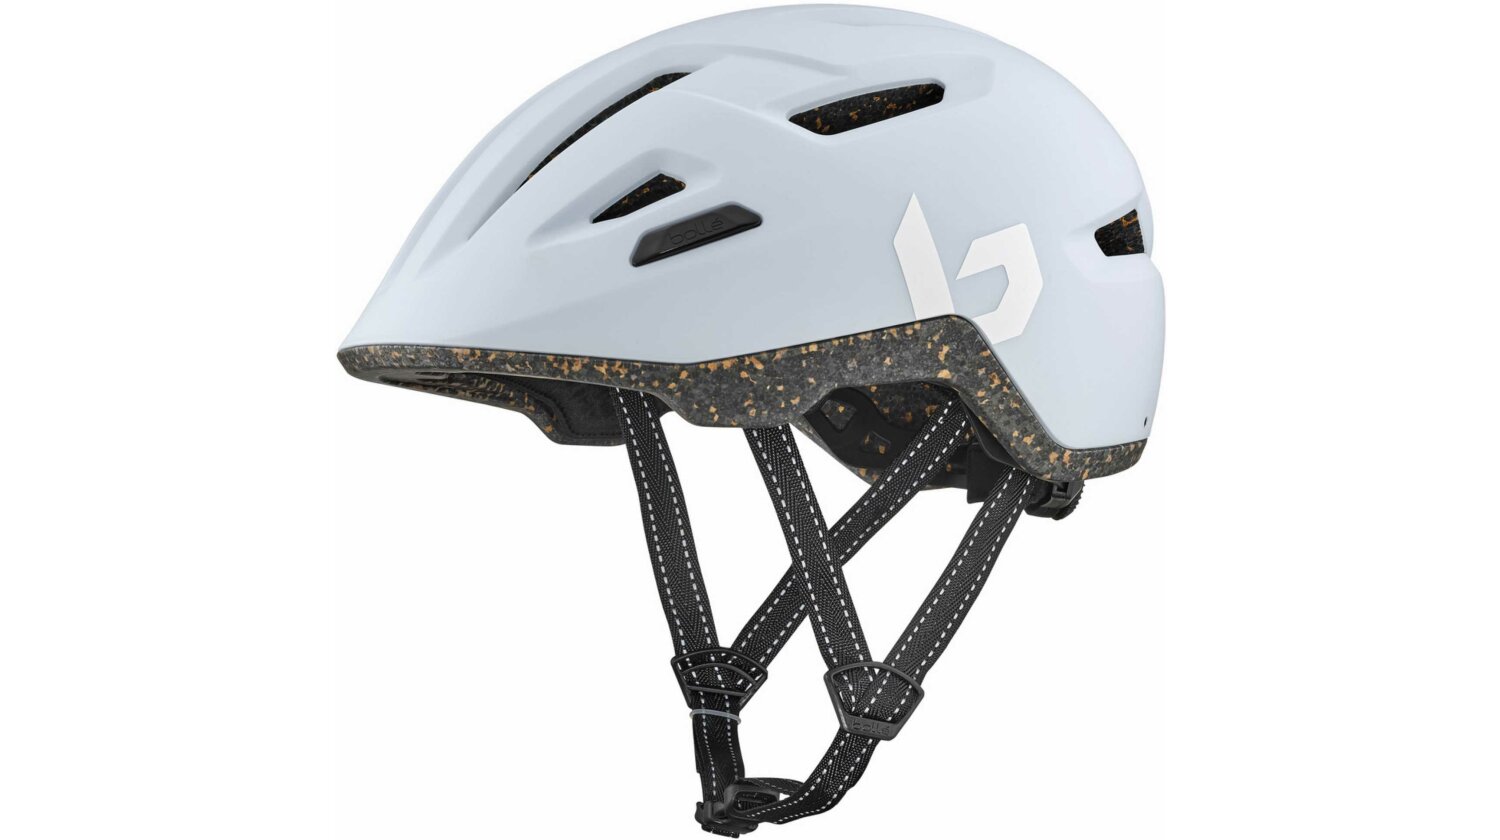 Bolle Eco Stance Helm offwhite matte